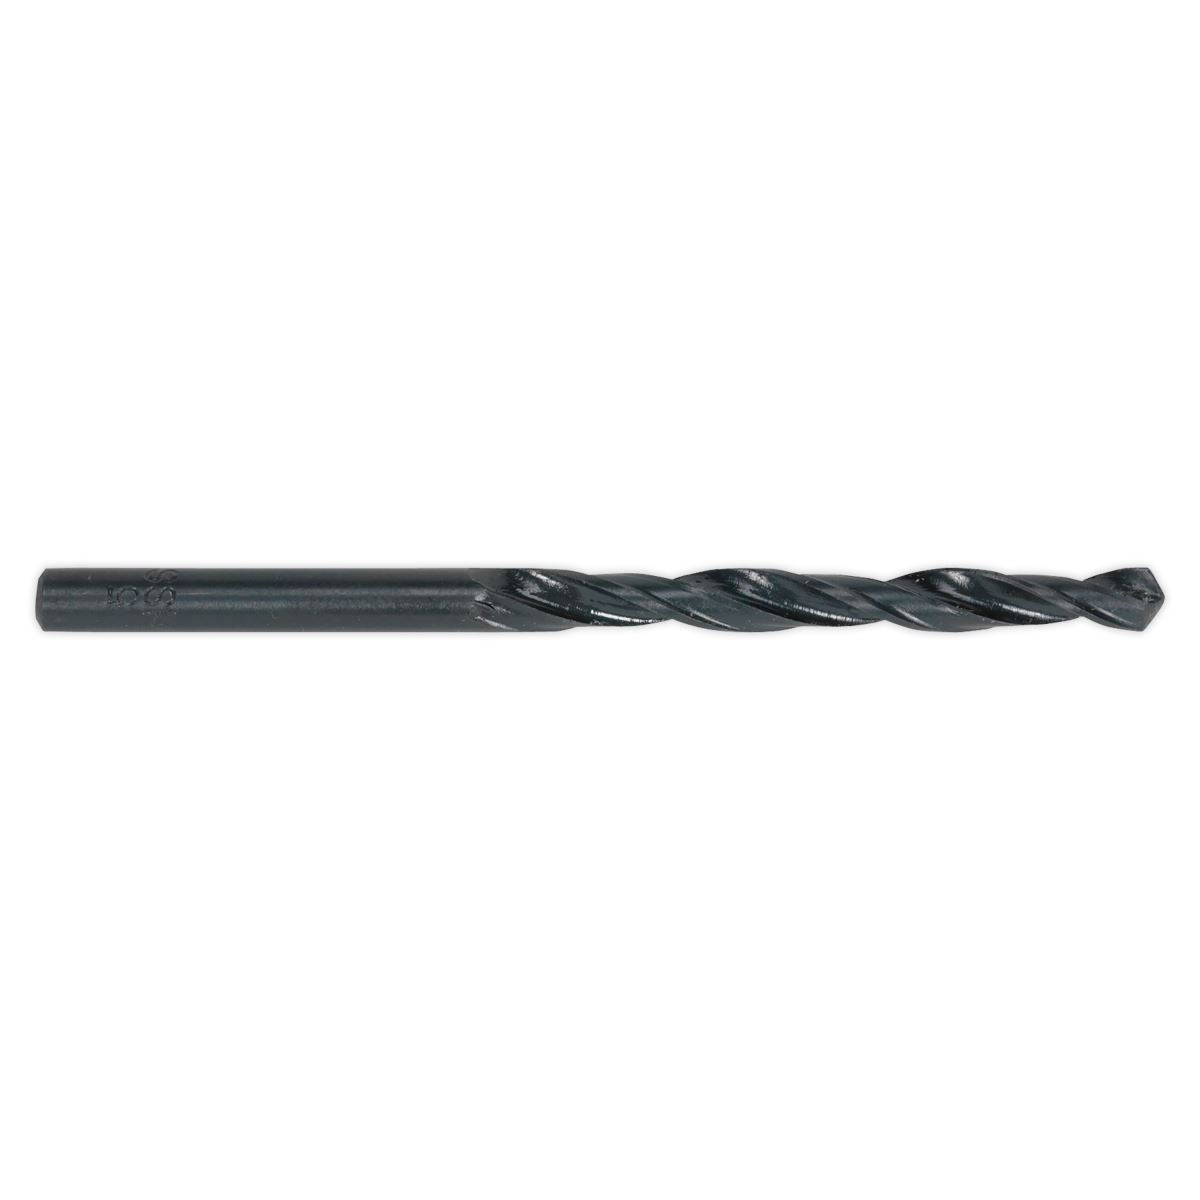 Sealey HSS Roll Forged Drill Bit Ø4.5mm Pack of 10